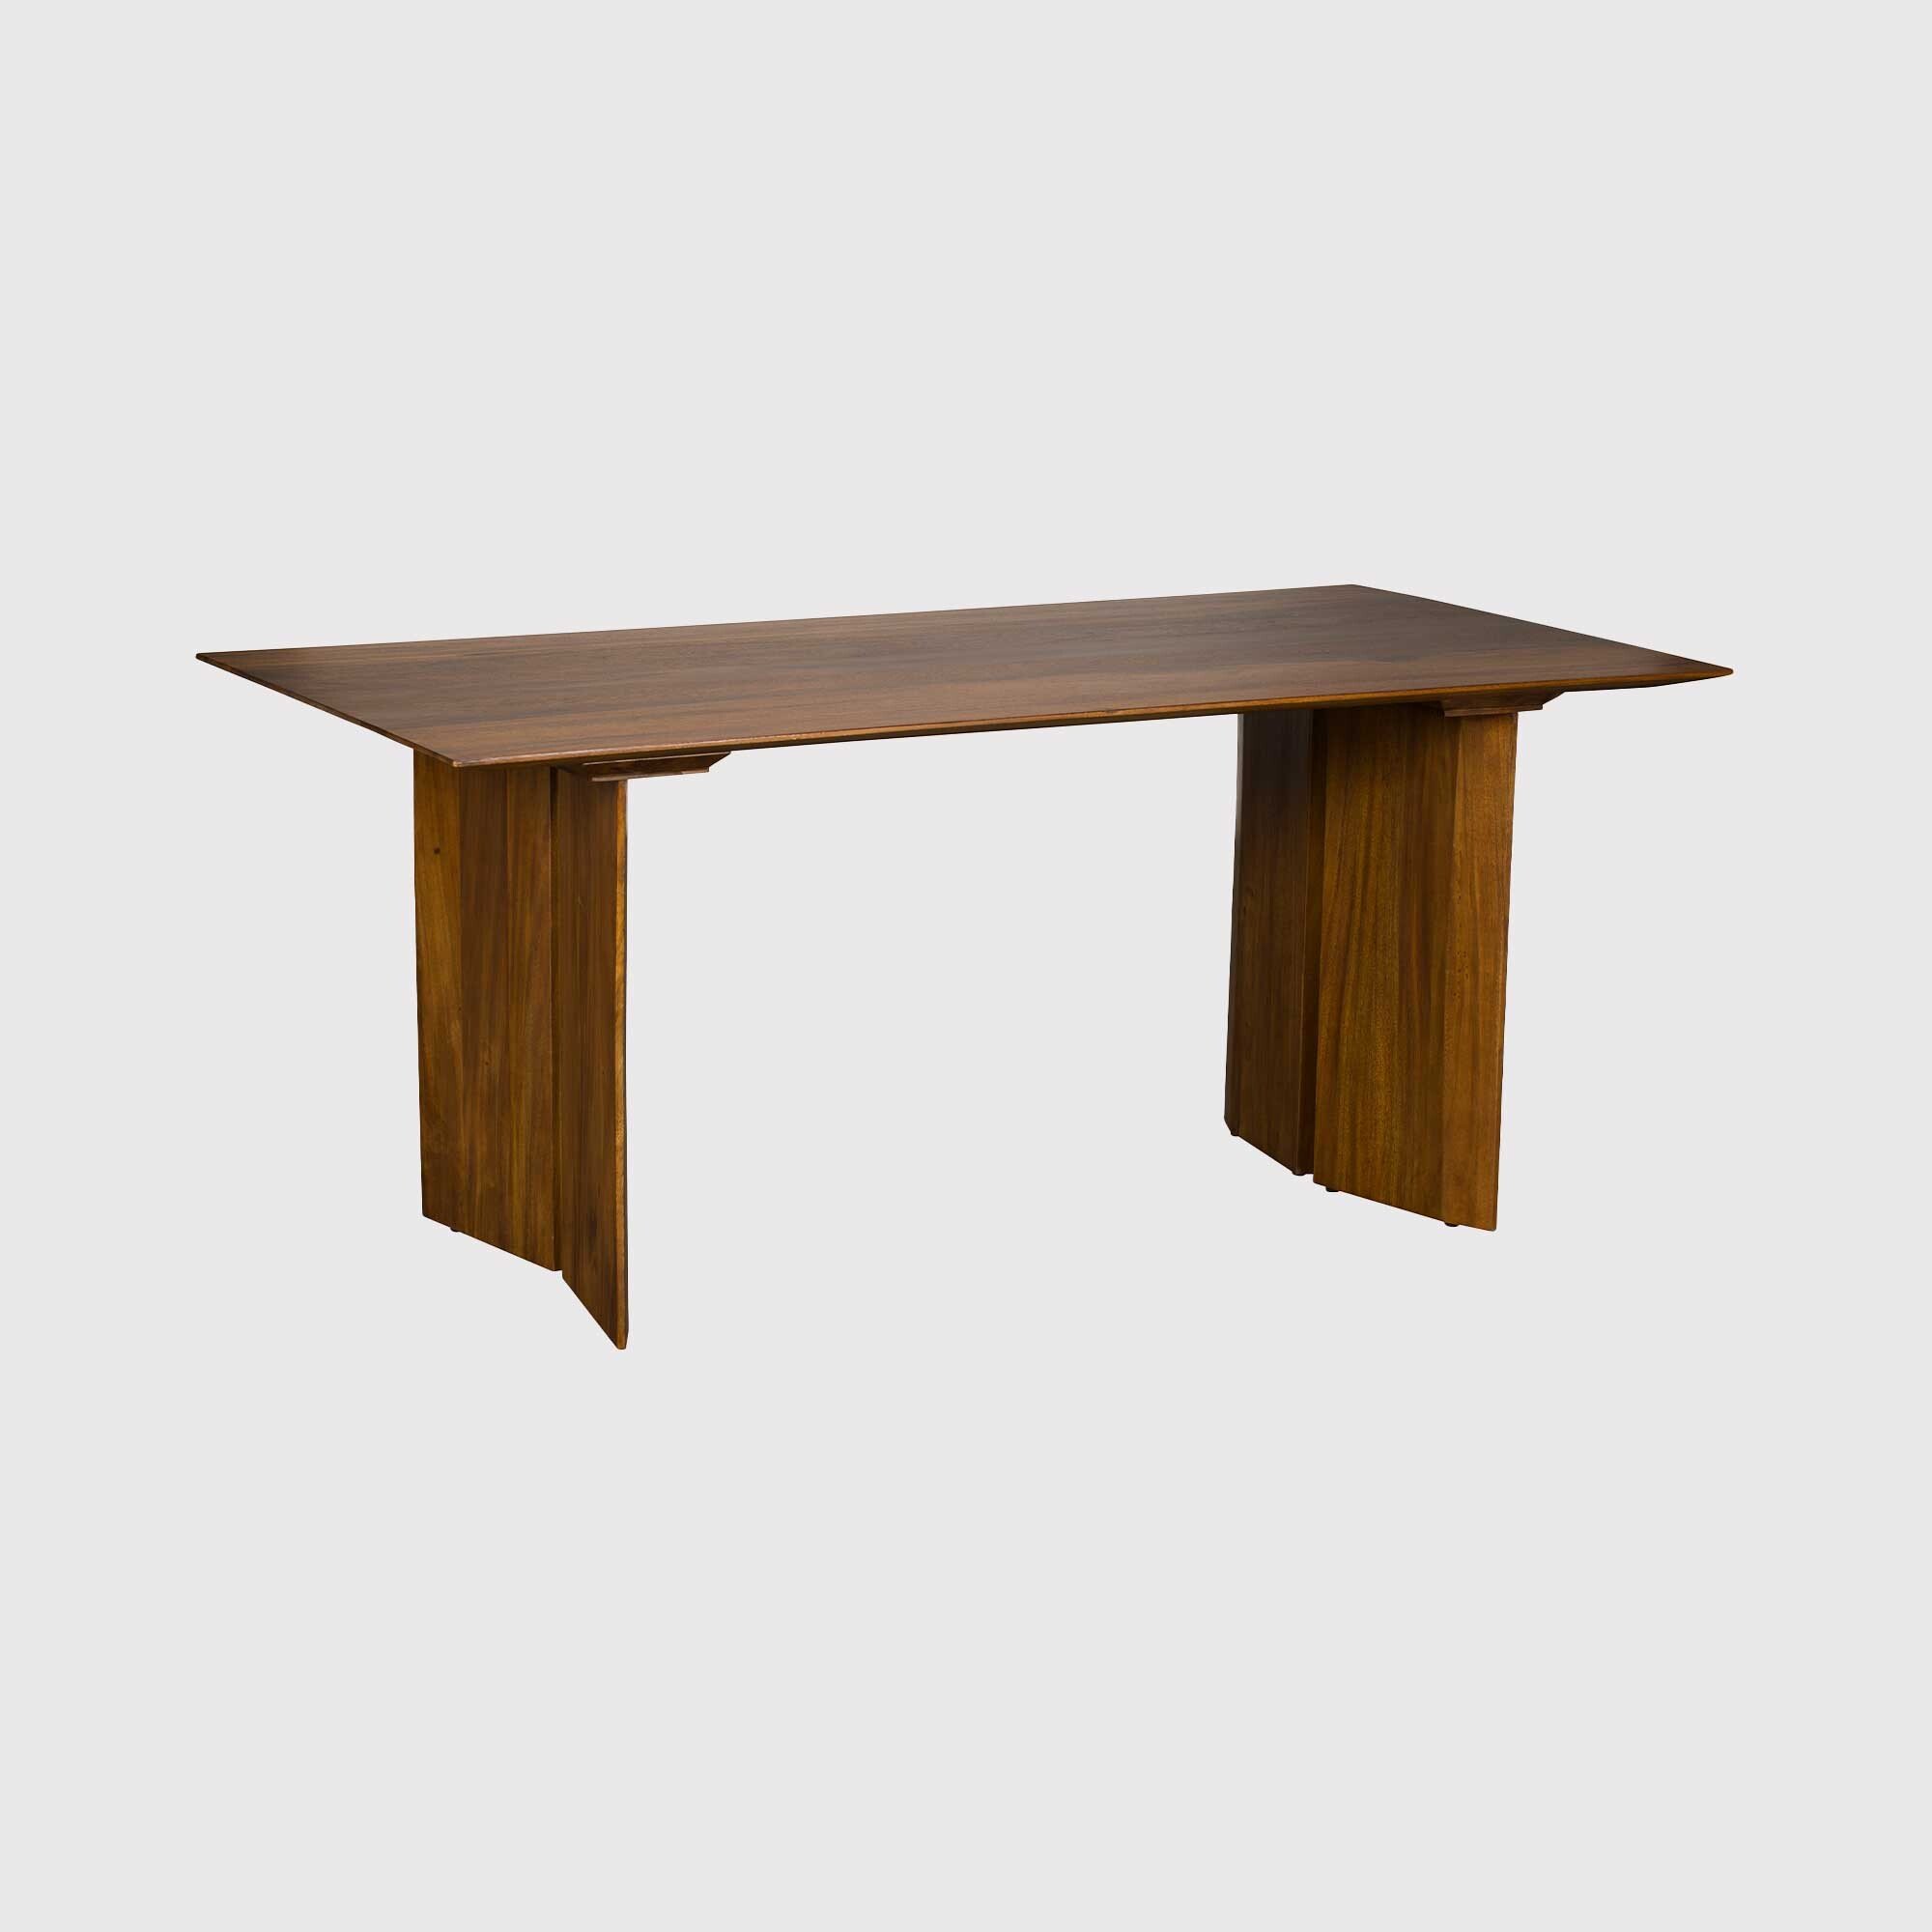 Sirona 220cm Dining Table, Brown | Barker & Stonehouse